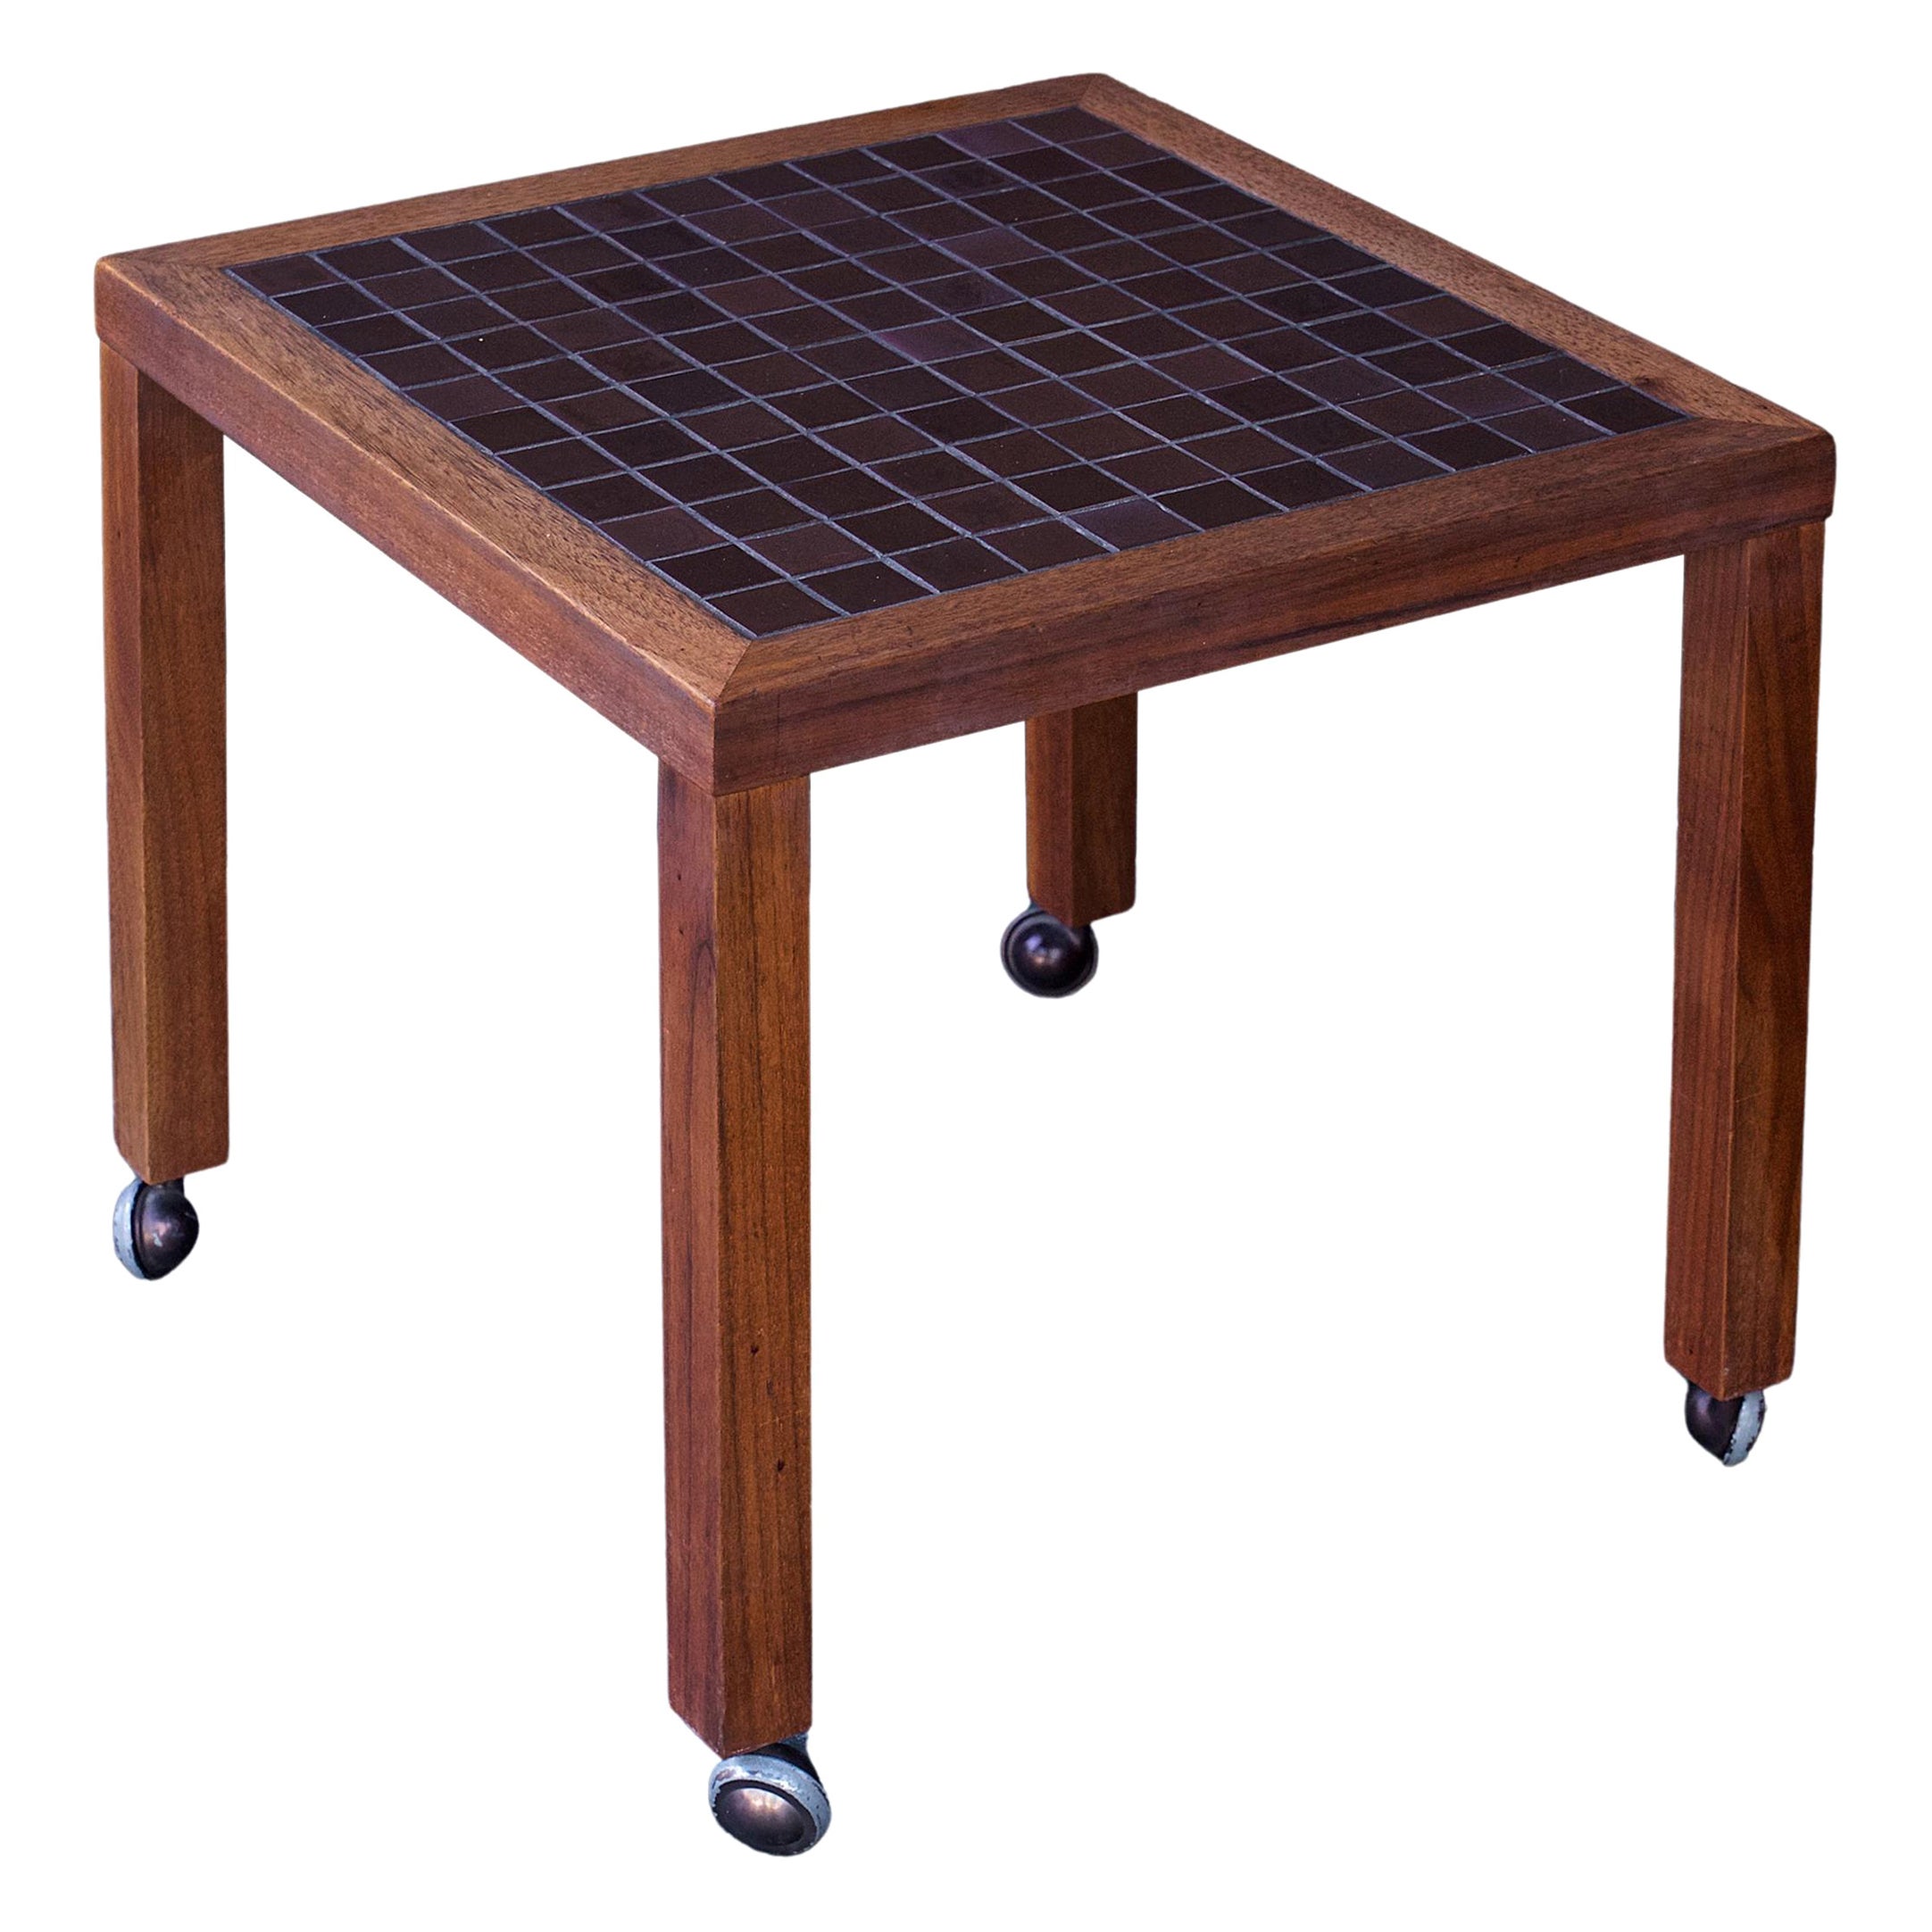 1960s Cabin Modern Martz Table Walnut + Chocolate Ceramic Tile Plant Stand MCM For Sale